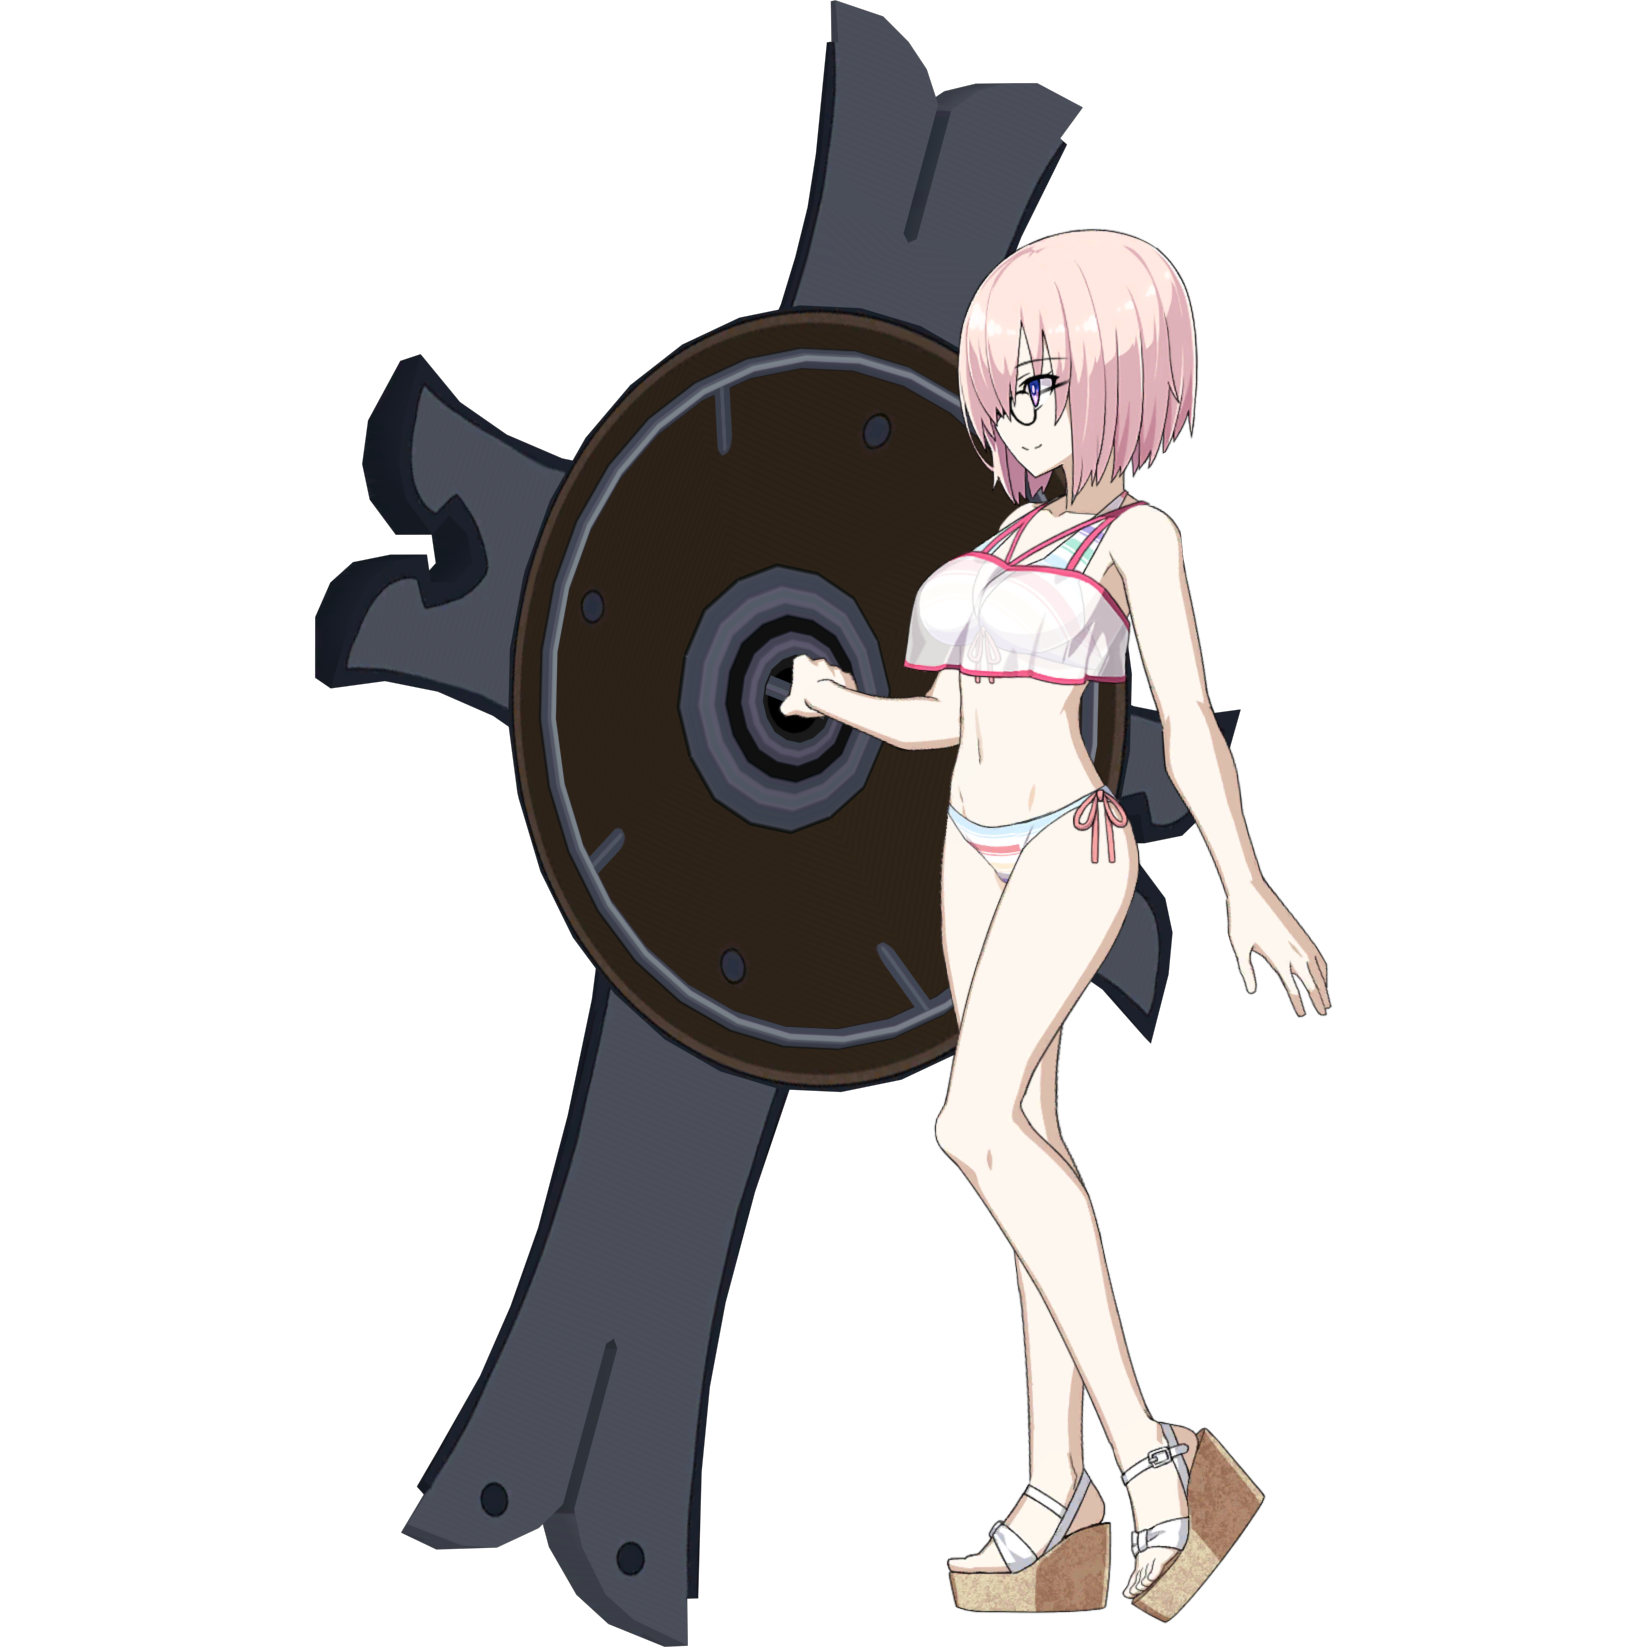 Sign of Smiling Face Mashu Kyrielight Craft Essence FGO Fate Grand Order Arcade 